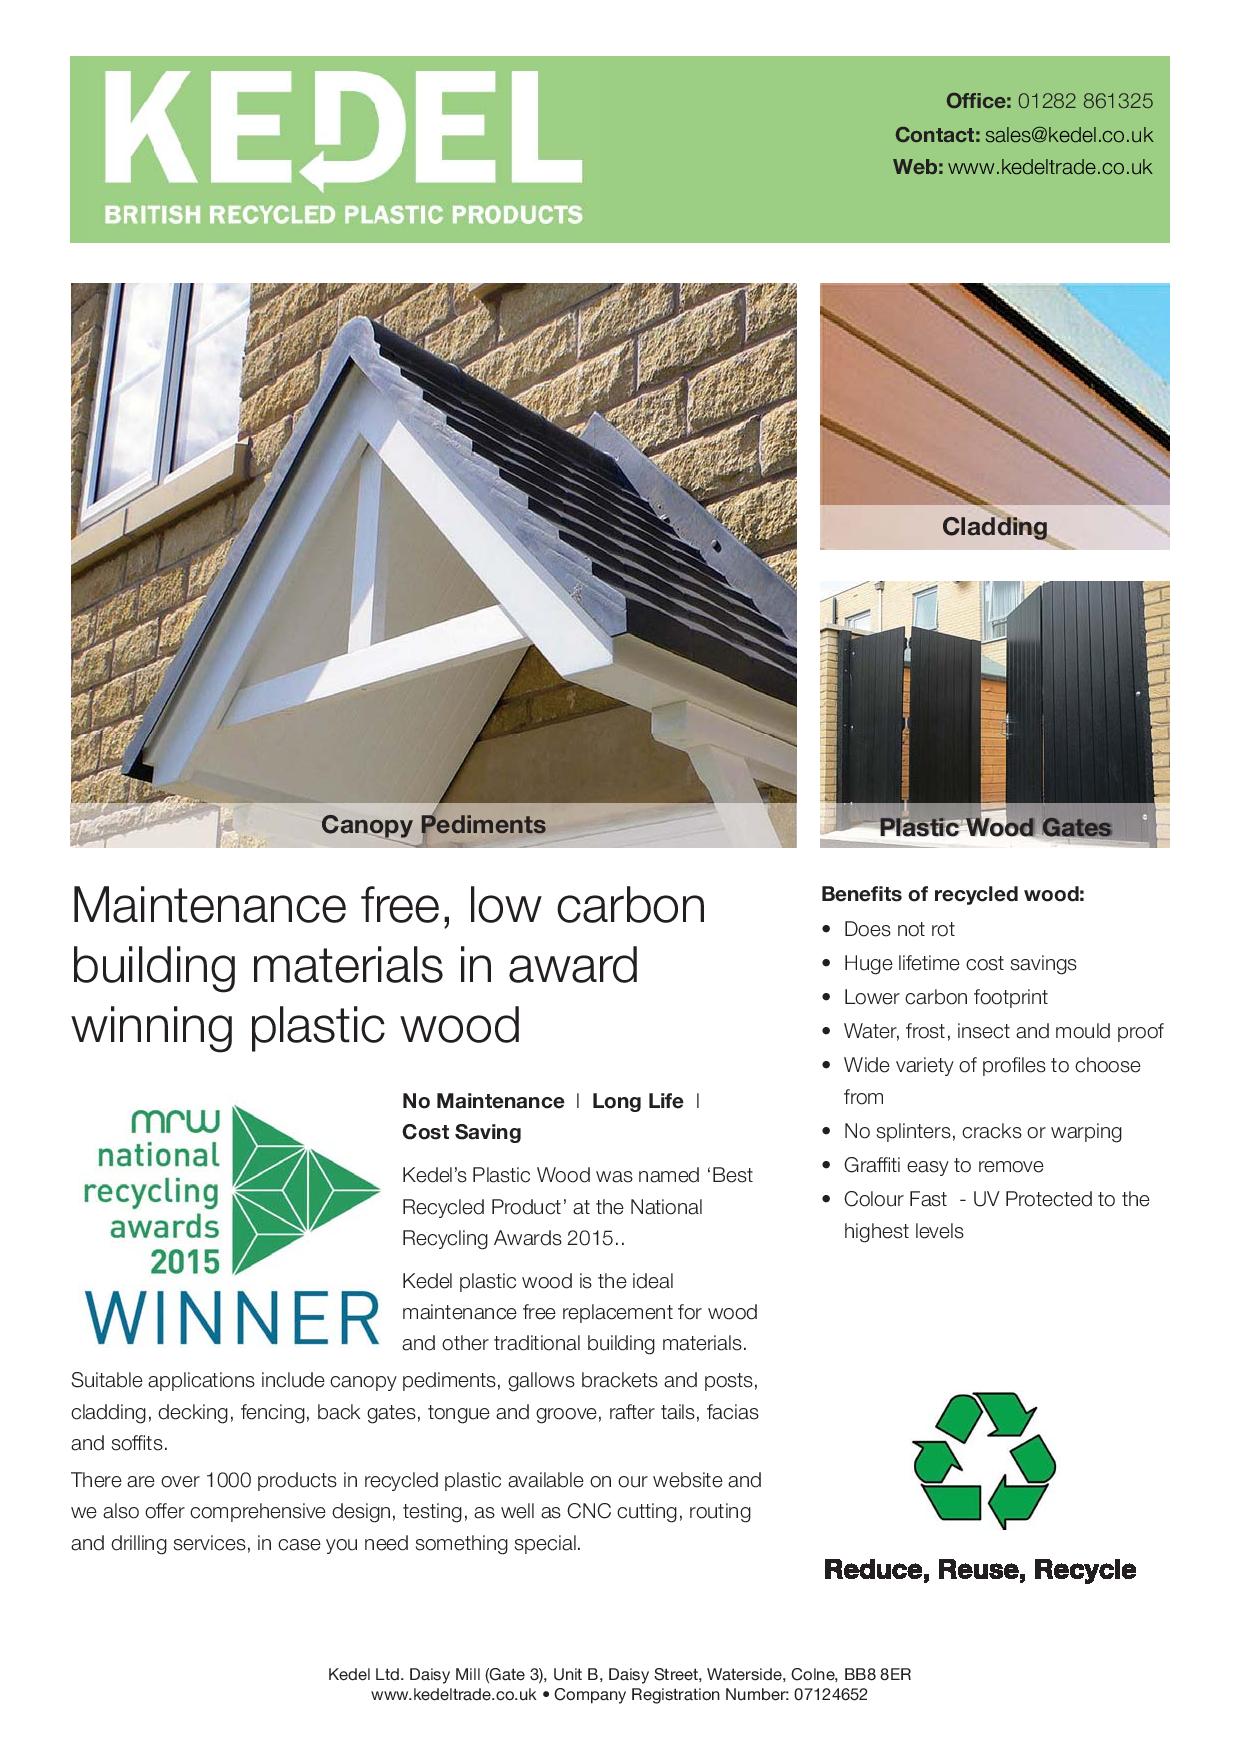 kEDEL Building Material Leaflet product range recycled plastic